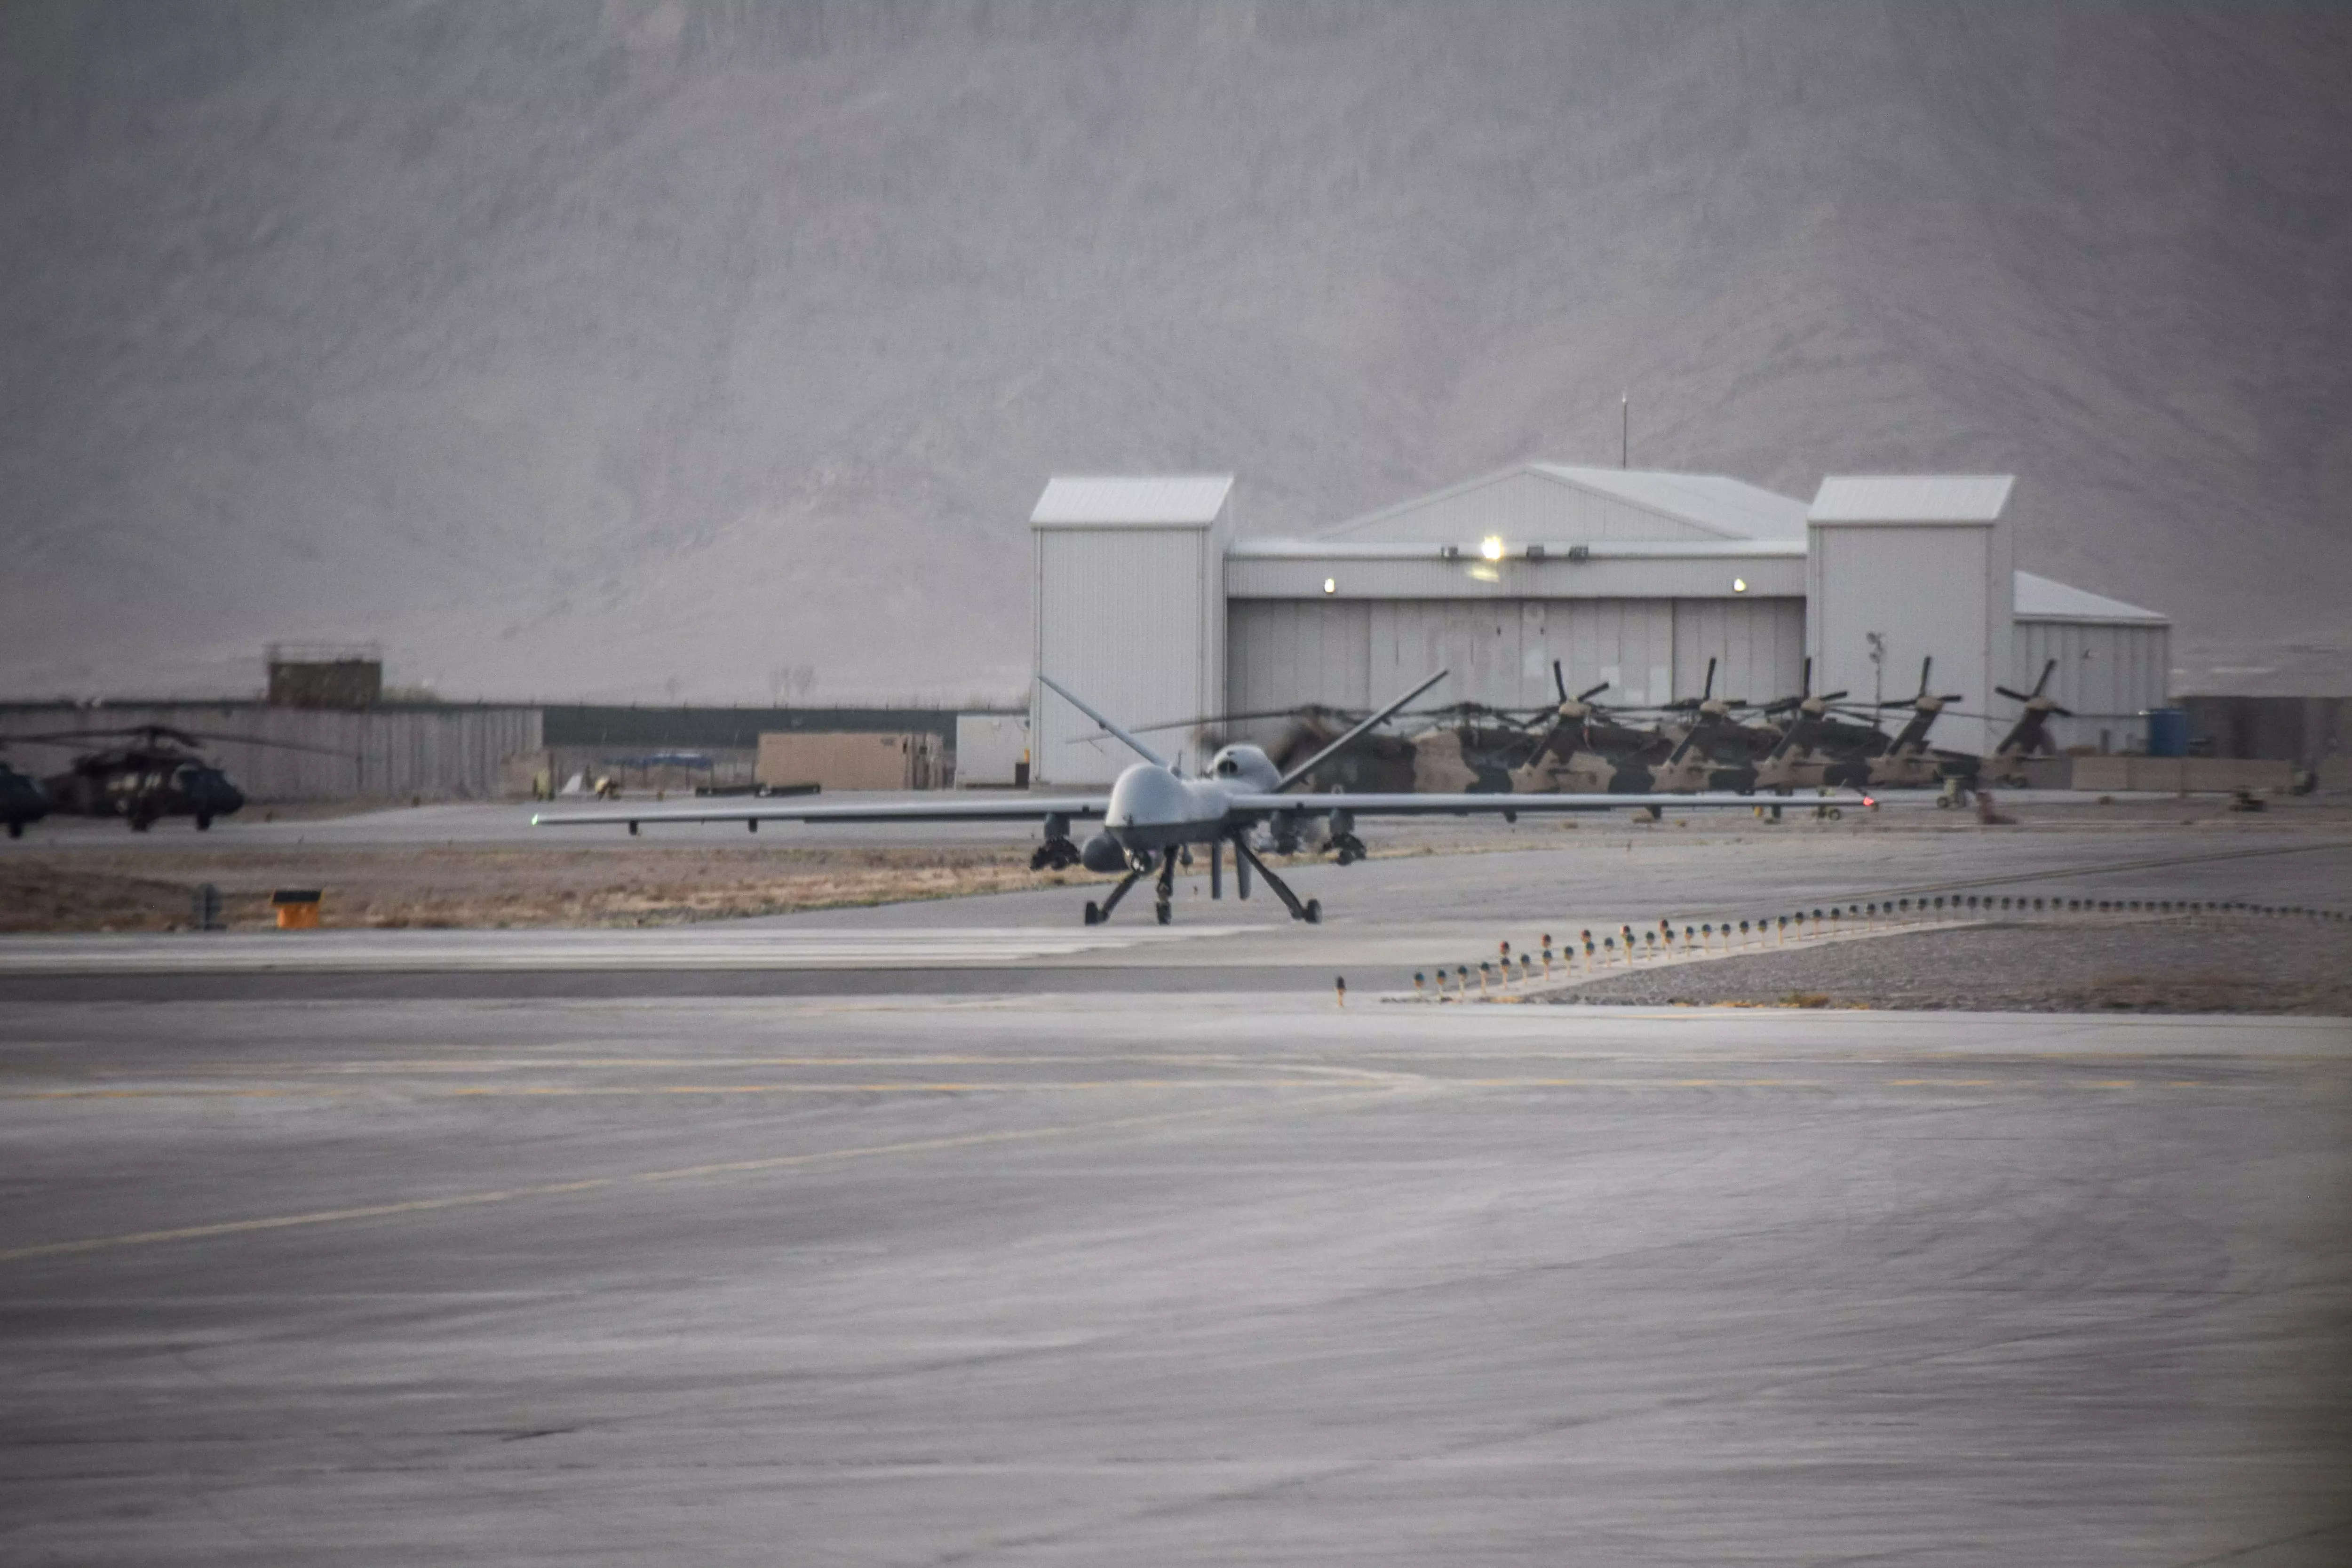 A US military MQ-9 Reaper drone waits for take-off at Kandahar Air Base in Afghanistan on March 9, 2018.